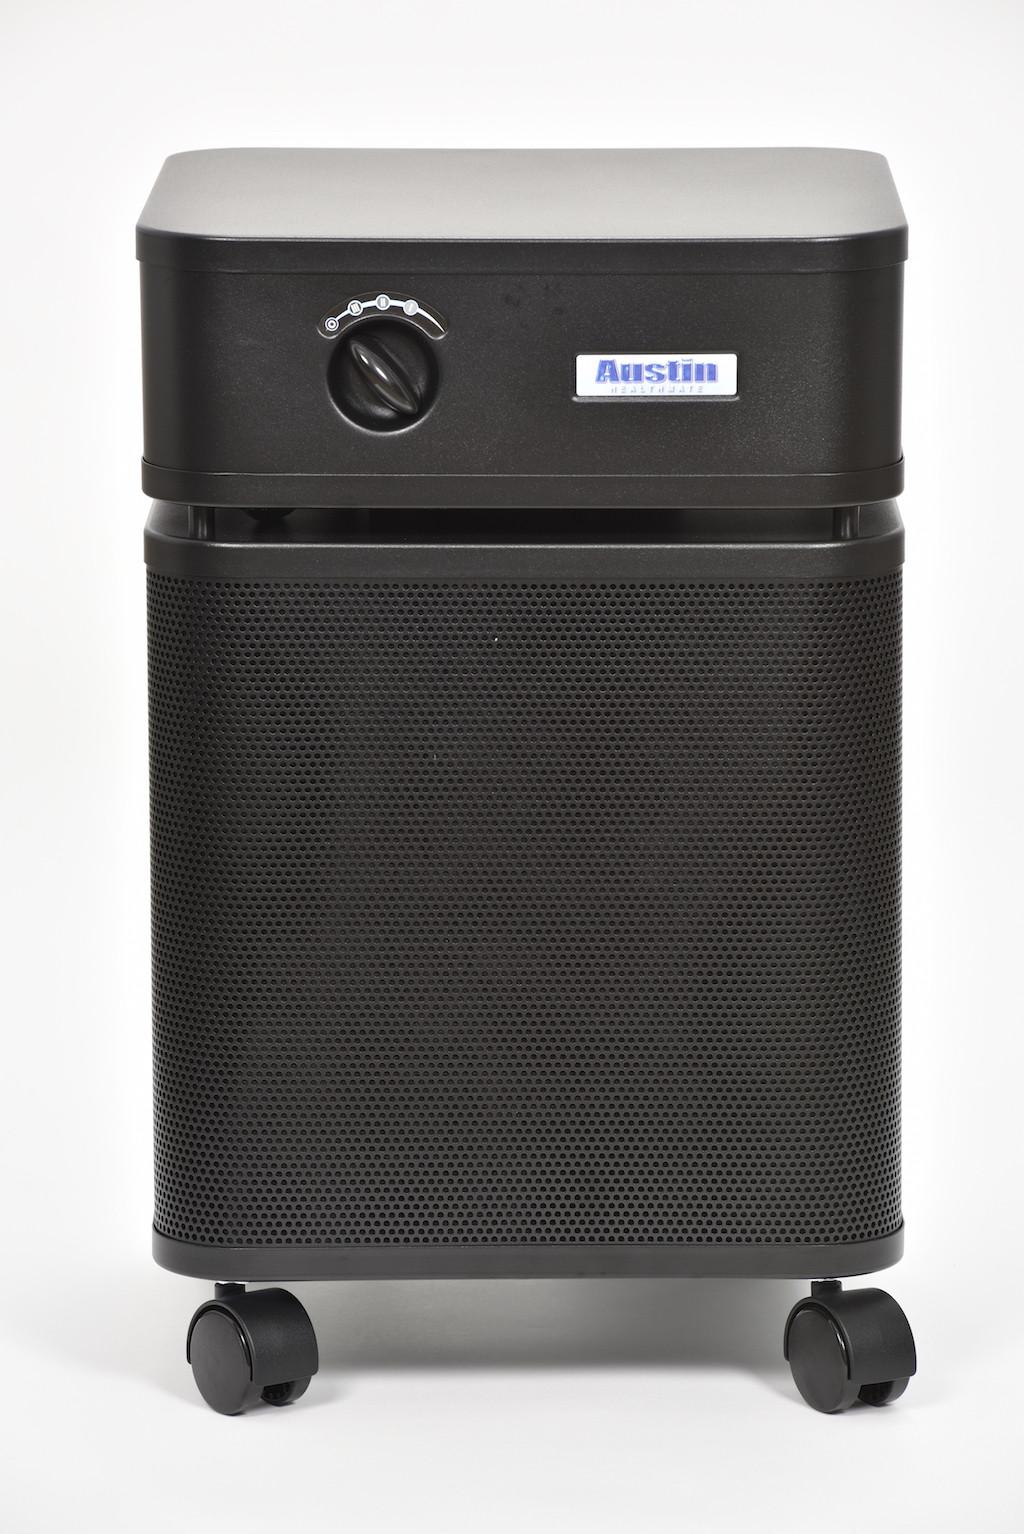 Every standard size Austin air cleaner includes 60 square feet of HEPA filtration medium.